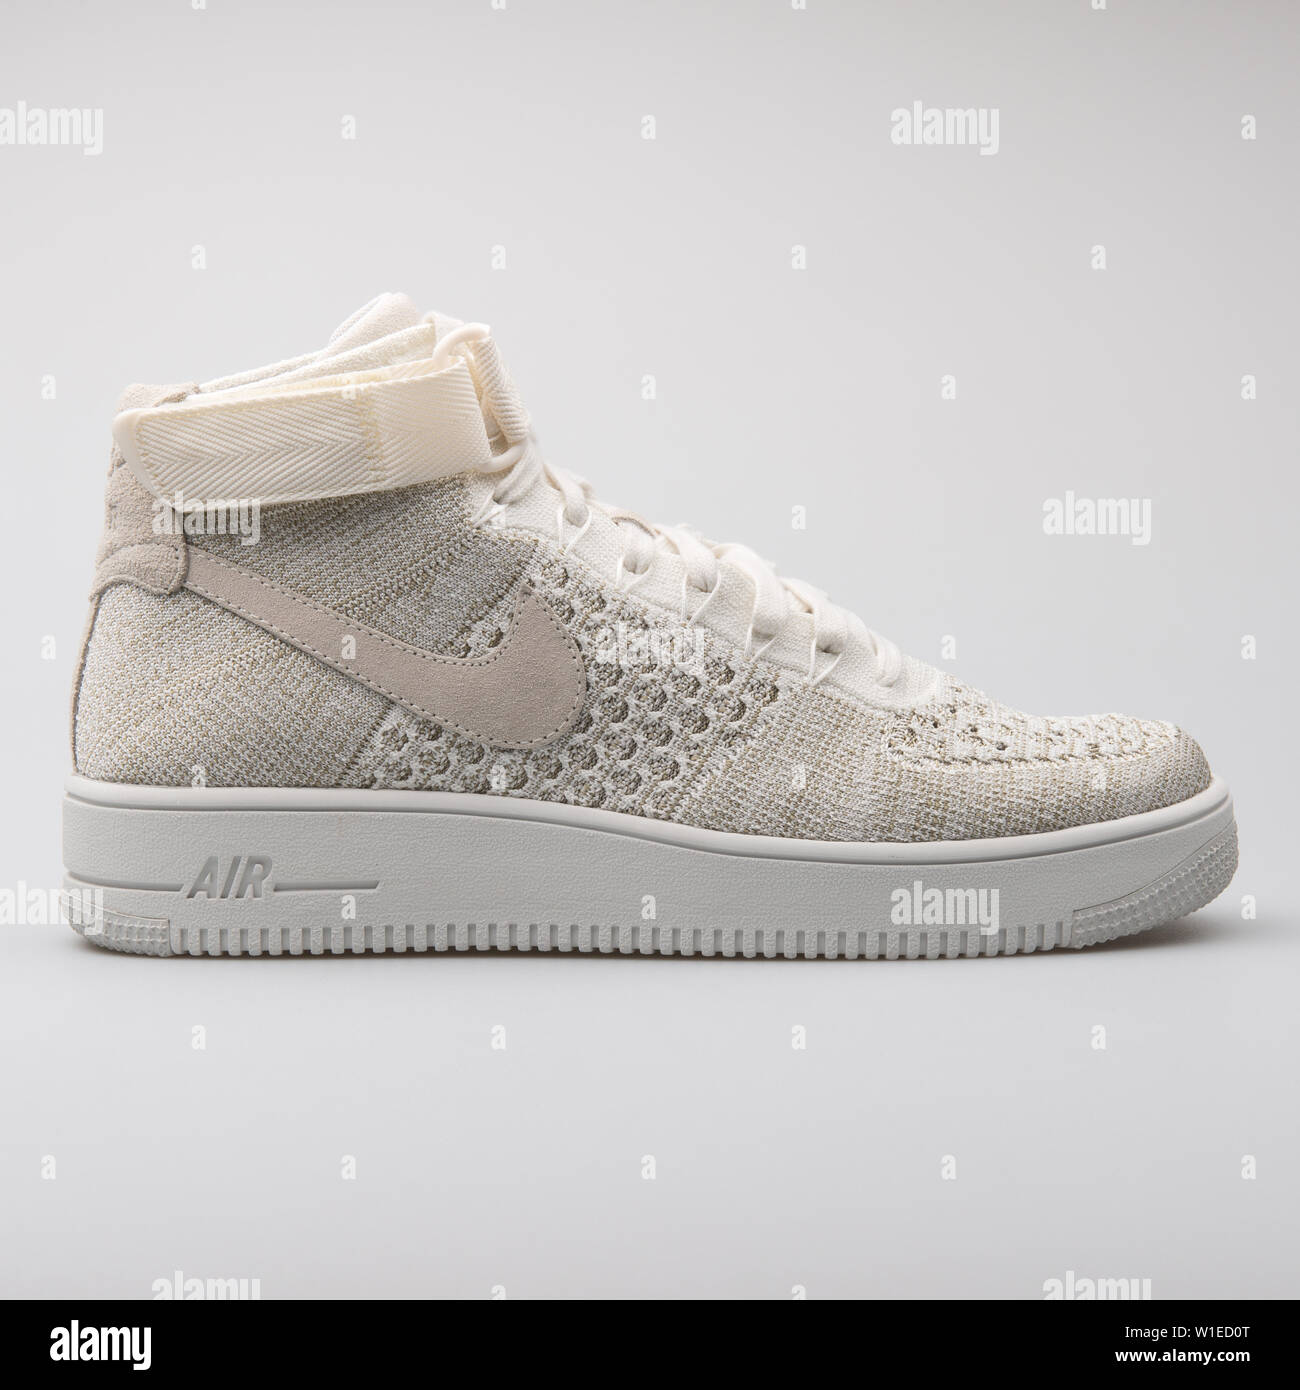 VIENNA, AUSTRIA - AUGUST 7, 2017: Nike Air Force 1 Ultra Flyknit Mid beige  and white sneaker on white background Stock Photo - Alamy